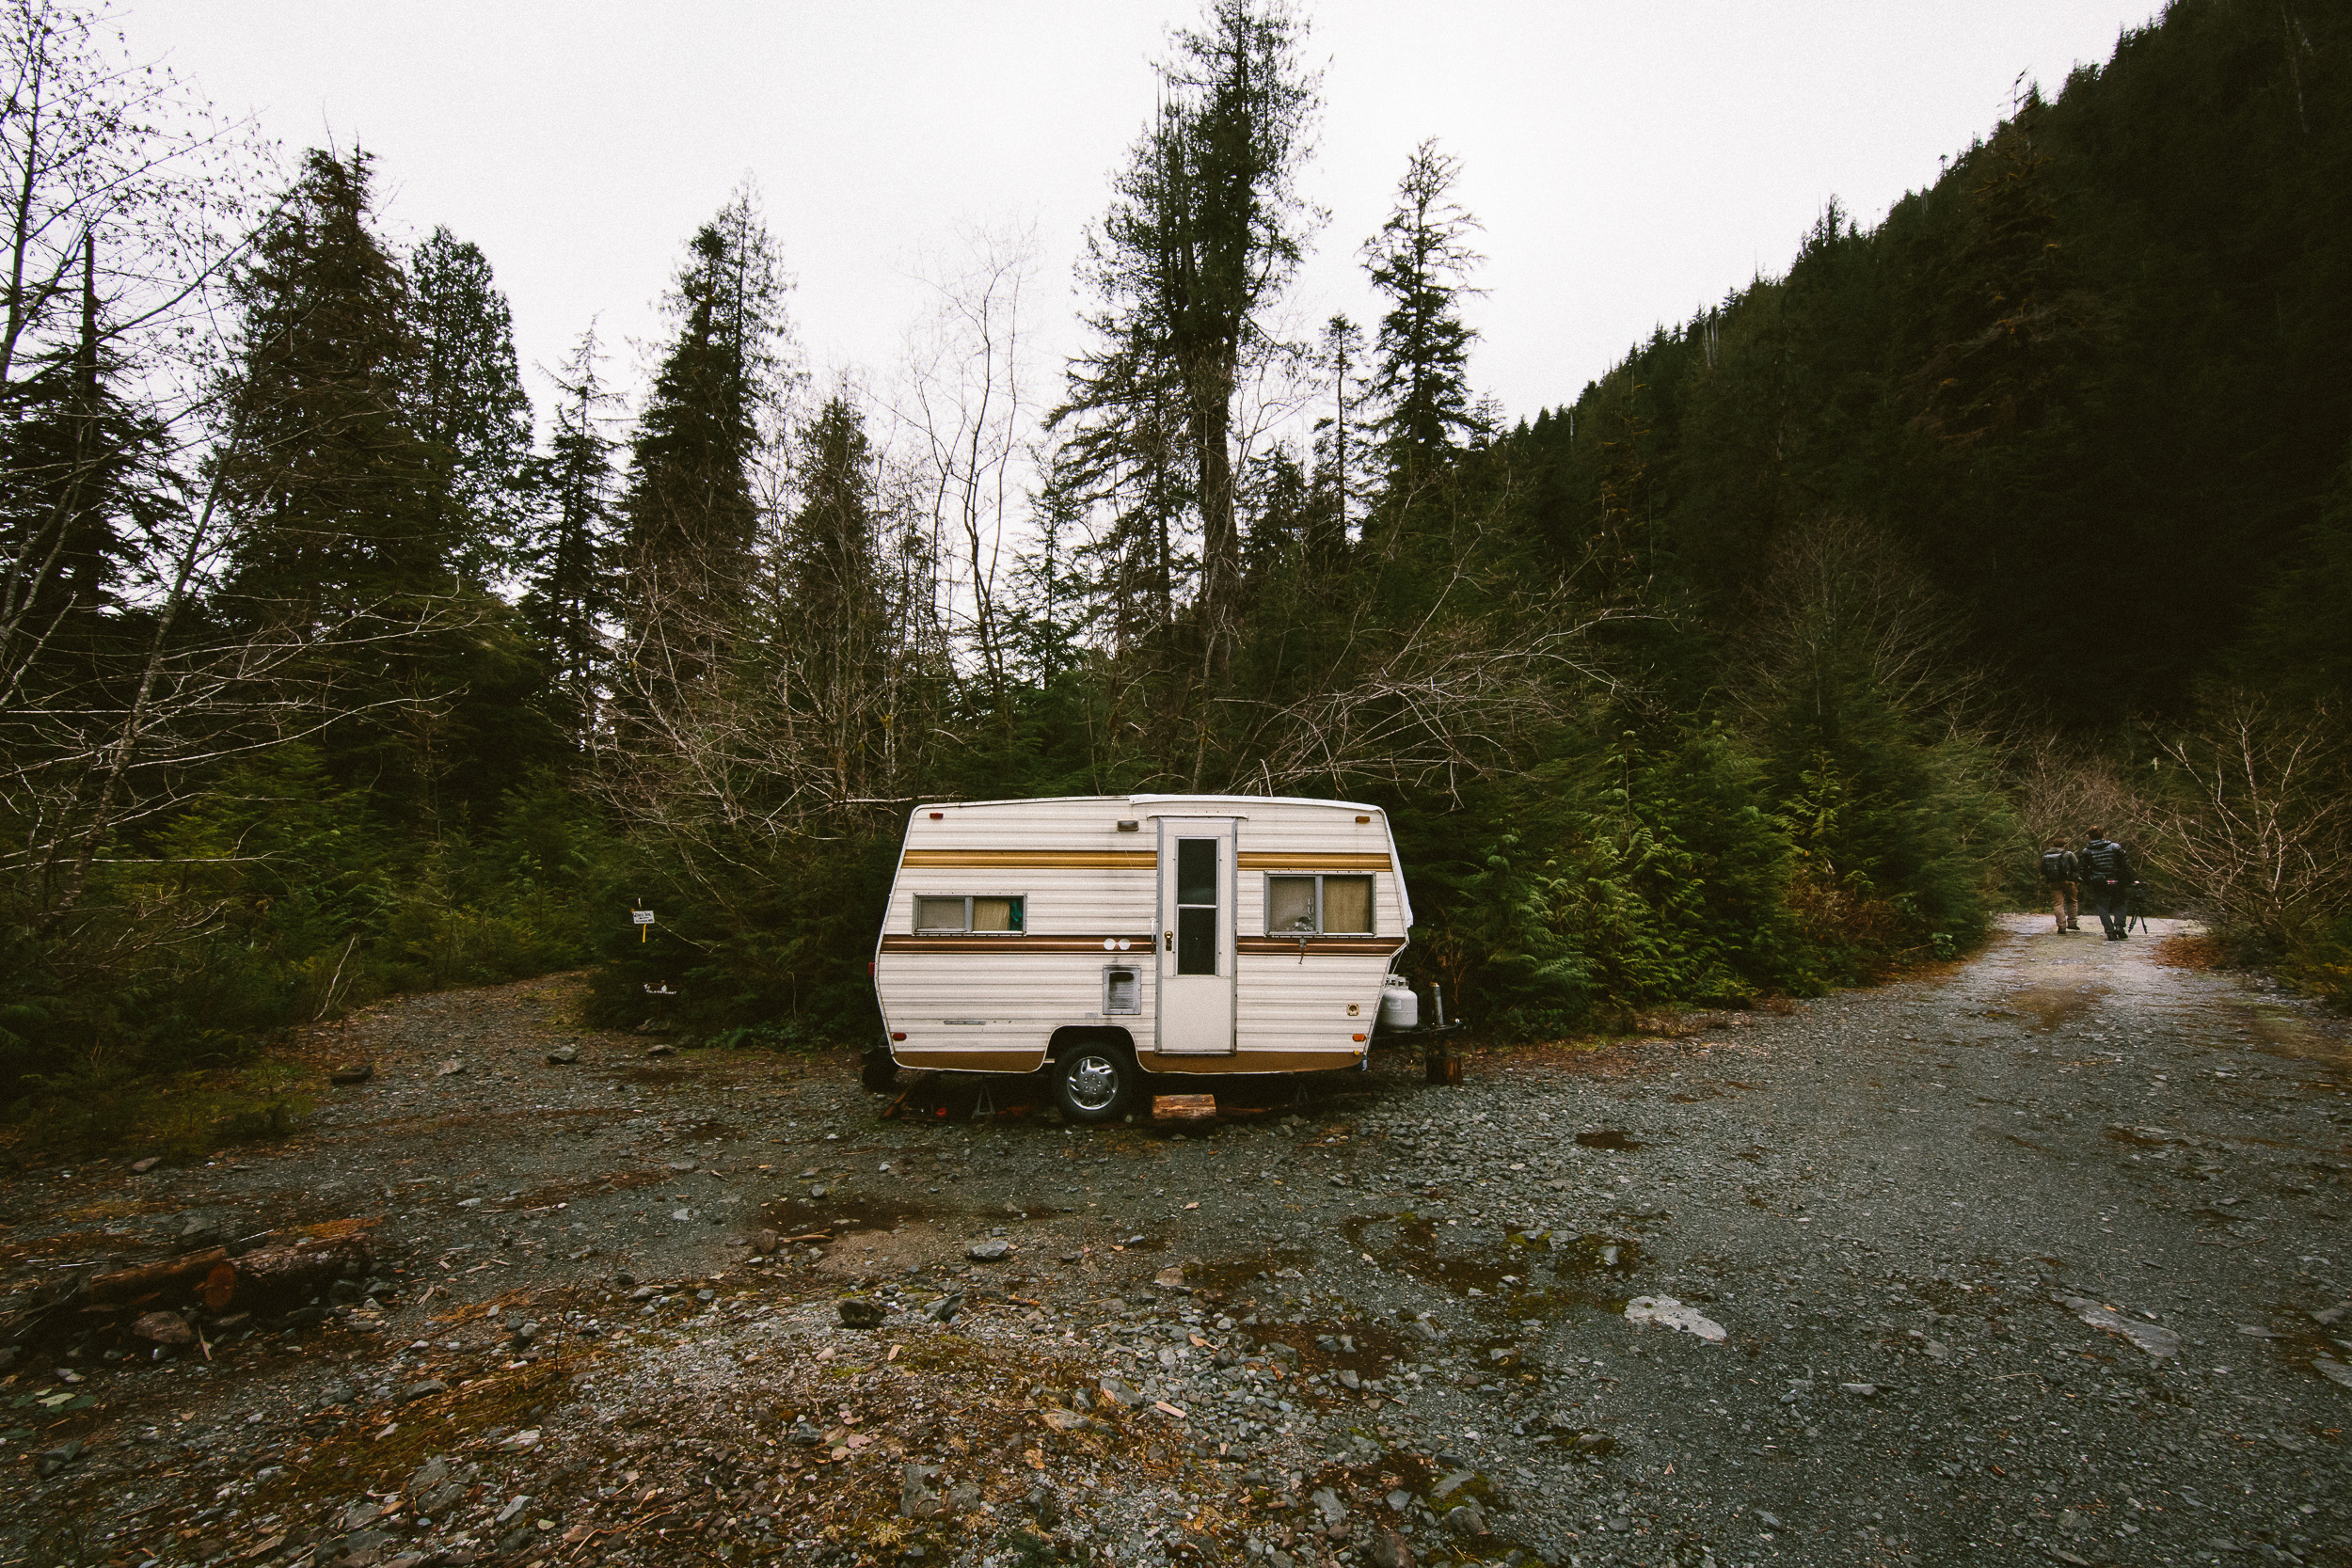 02-Vancouver-Island-BC-Carmanah-Walbran-Valley-Old-Growth-Forest-Protestor-RV.jpg